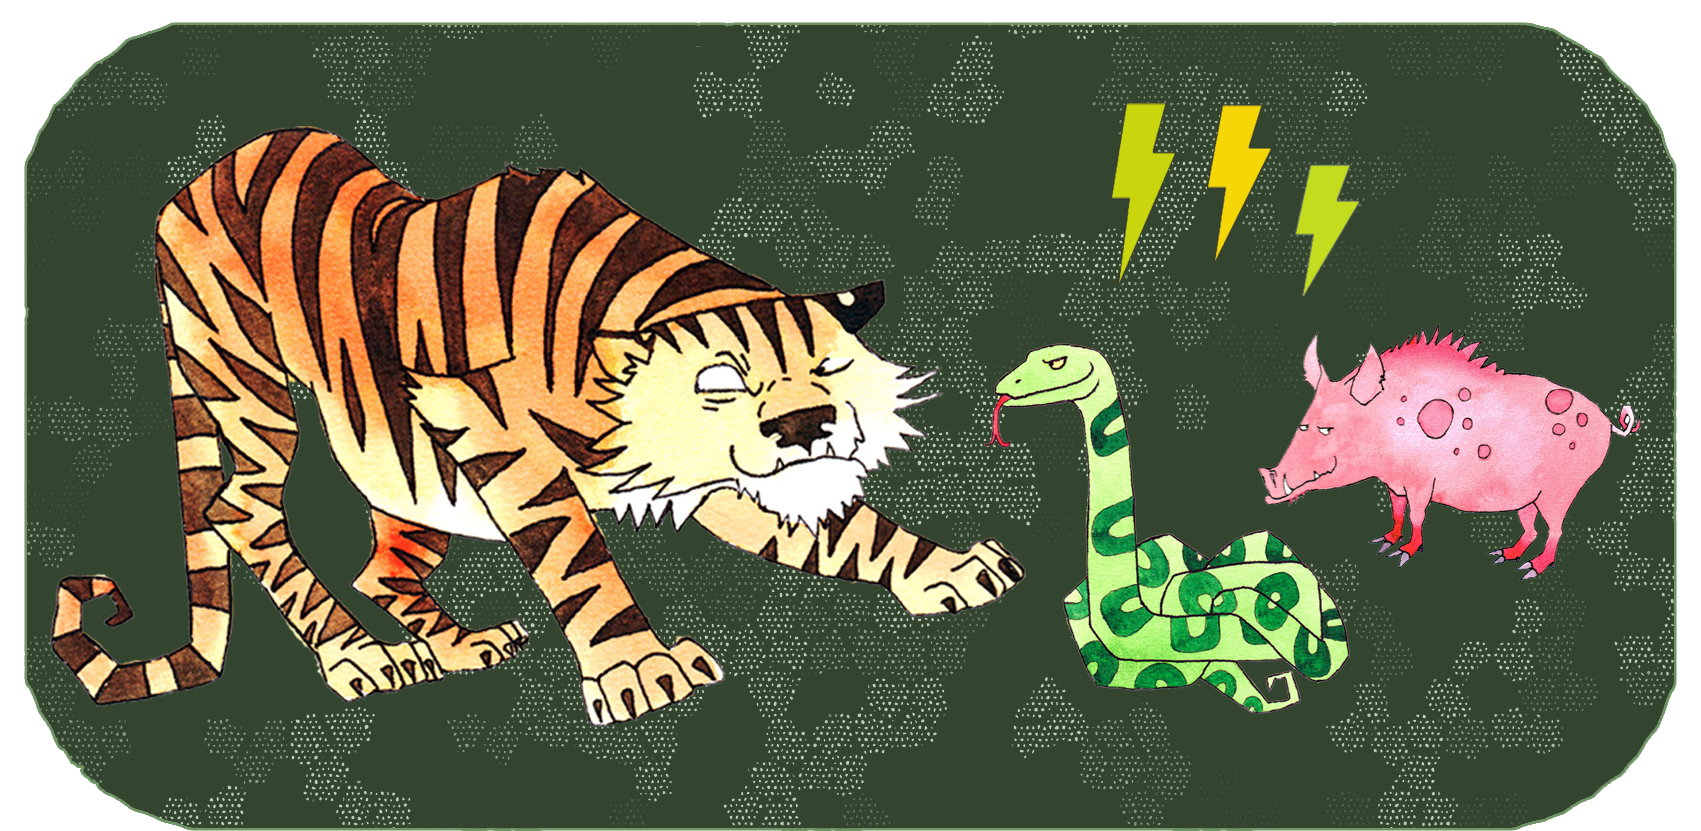 Chinese zodiac animals | 3 years apart | The Tiger